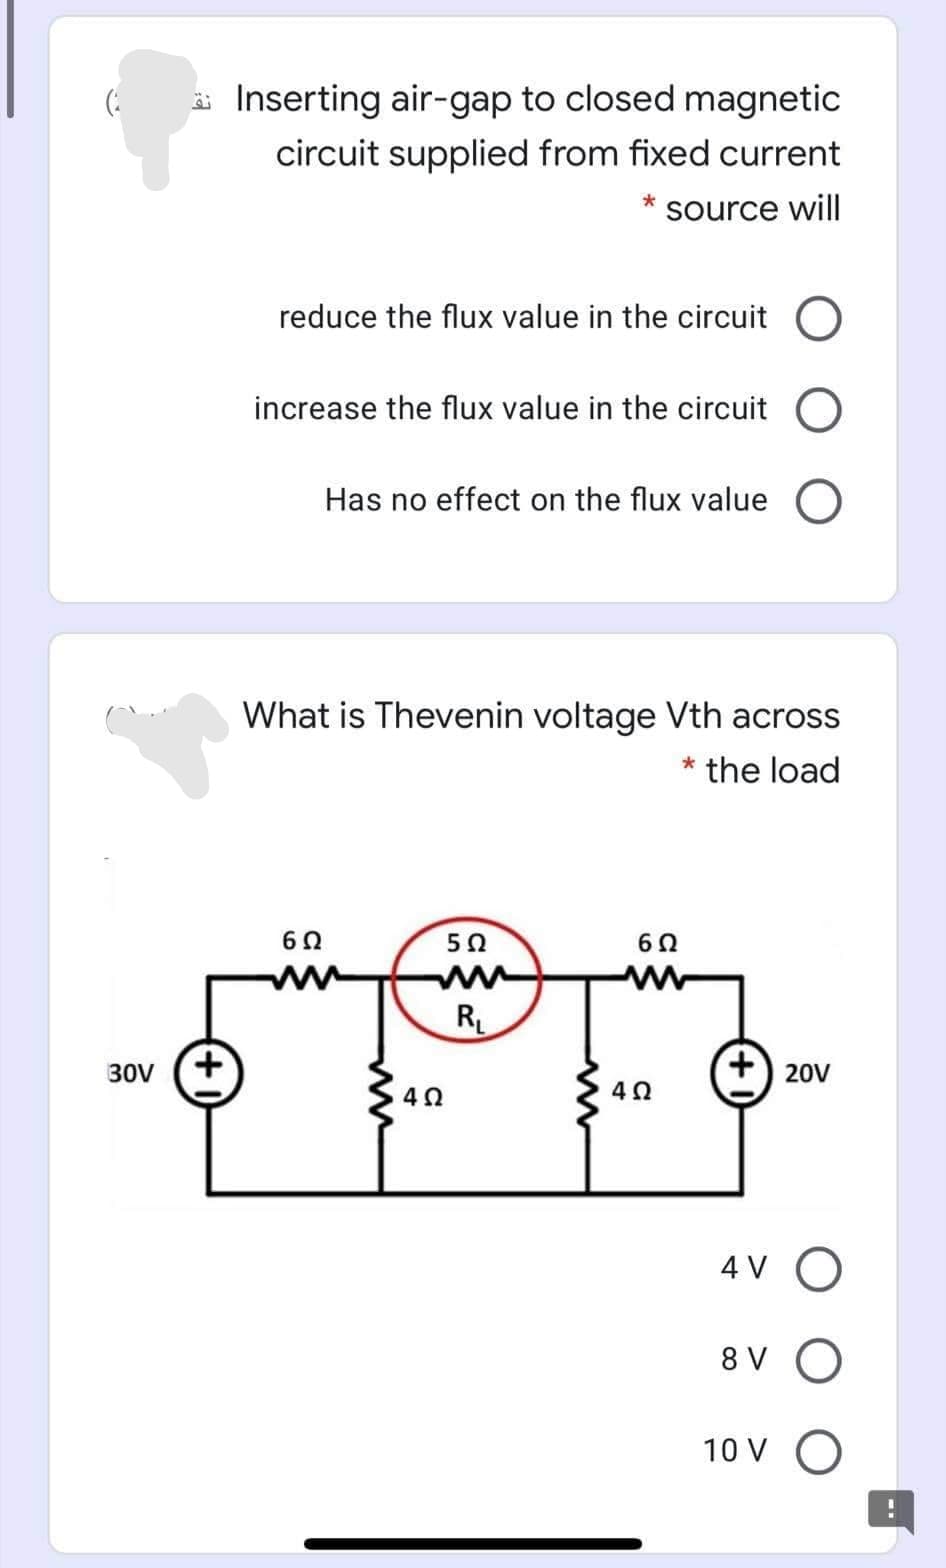 Inserting air-gap to closed magnetic
circuit supplied from fixed current
source will
reduce the flux value in the circuit
increase the flux value in the circuit
Has no effect on the flux value O
